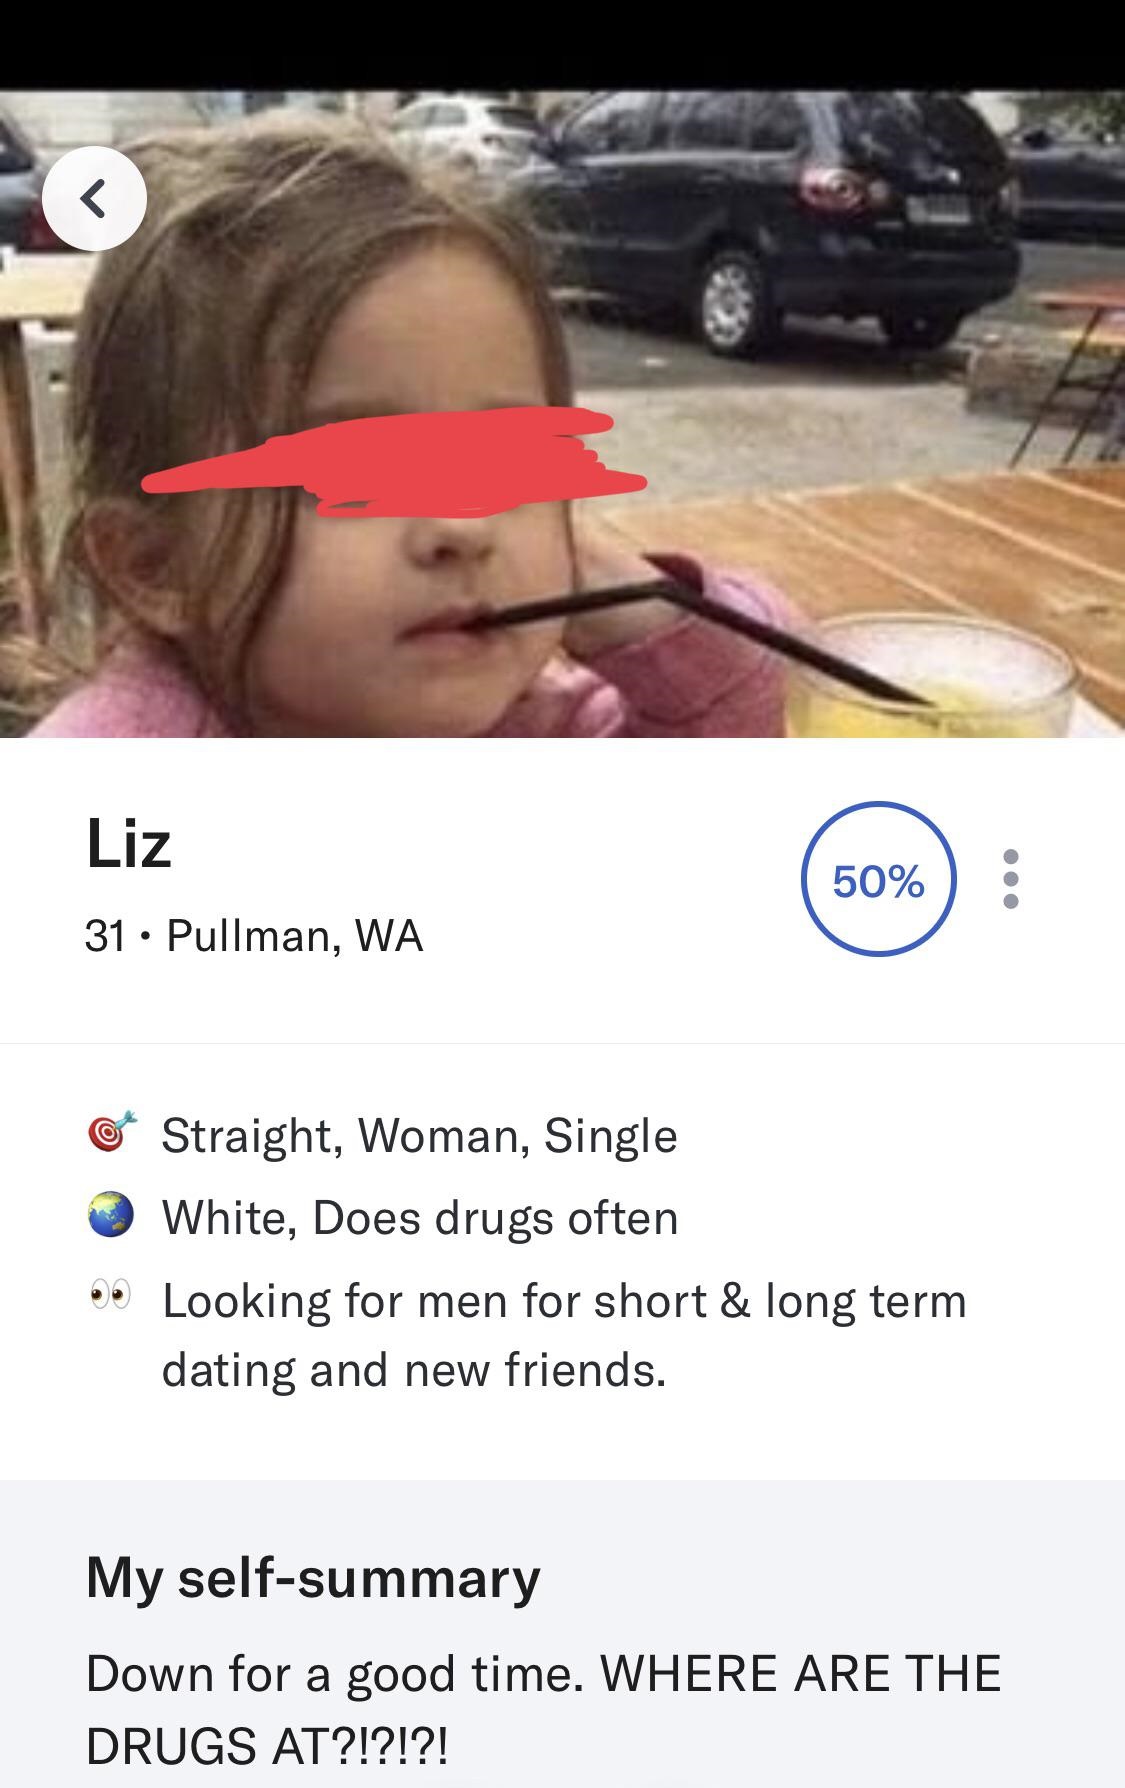 Liz 50% 50% 31 Pullman, Wa 31. Pullman, Wa Straight, Woman, Single White, Does drugs often Looking for men for short & long term dating and new friends. My selfsummary Down for a good time. Where Are The Drugs At?!?!?!